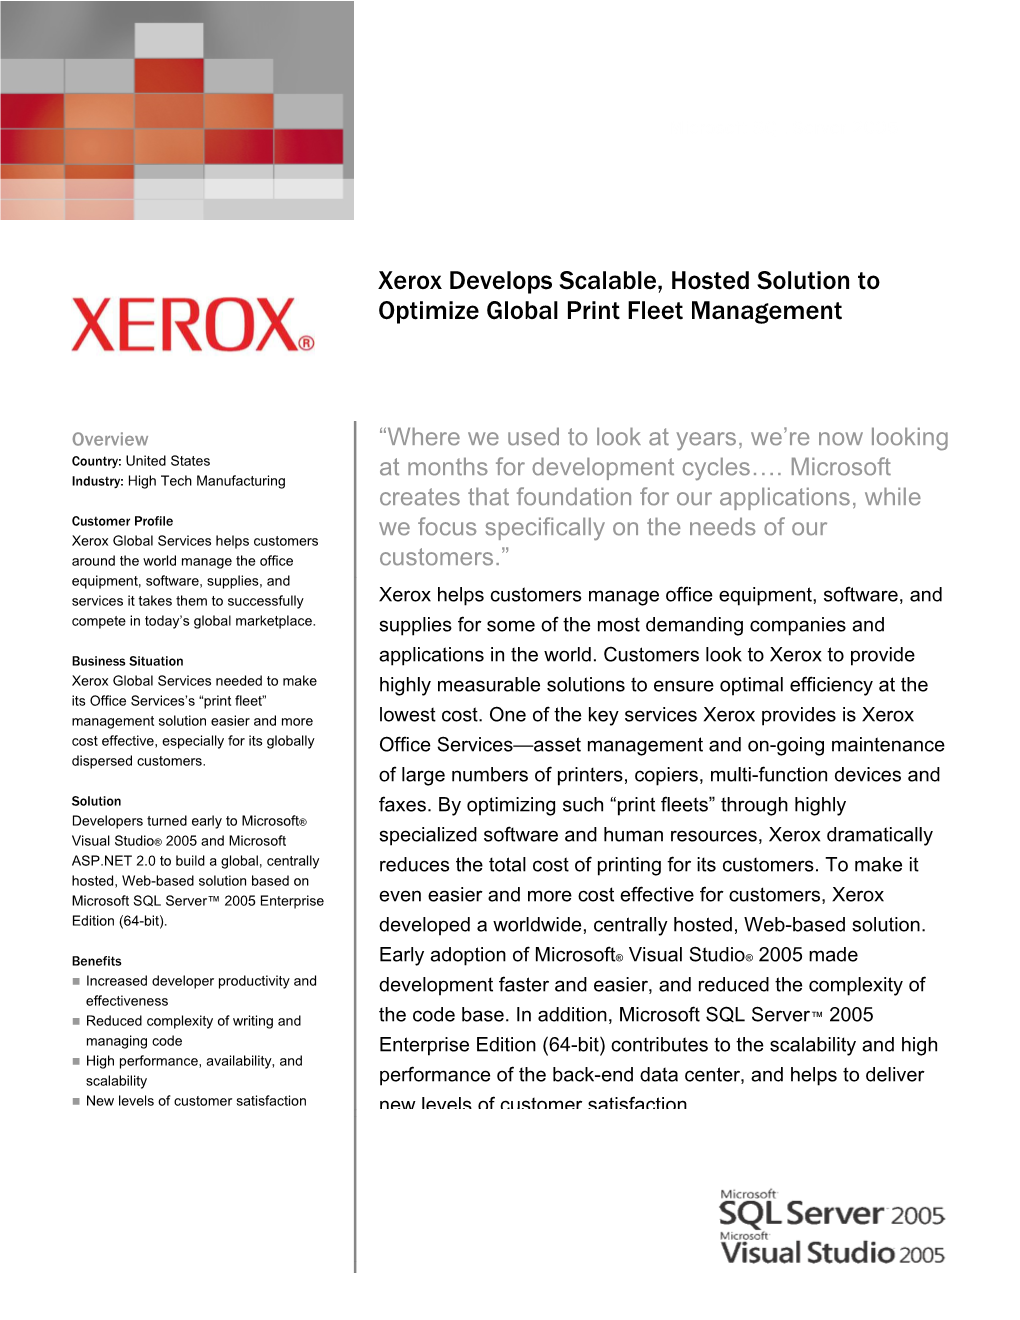 Xerox Develops Scalable, Hosted Solution to Optimize Global Print Fleet Management